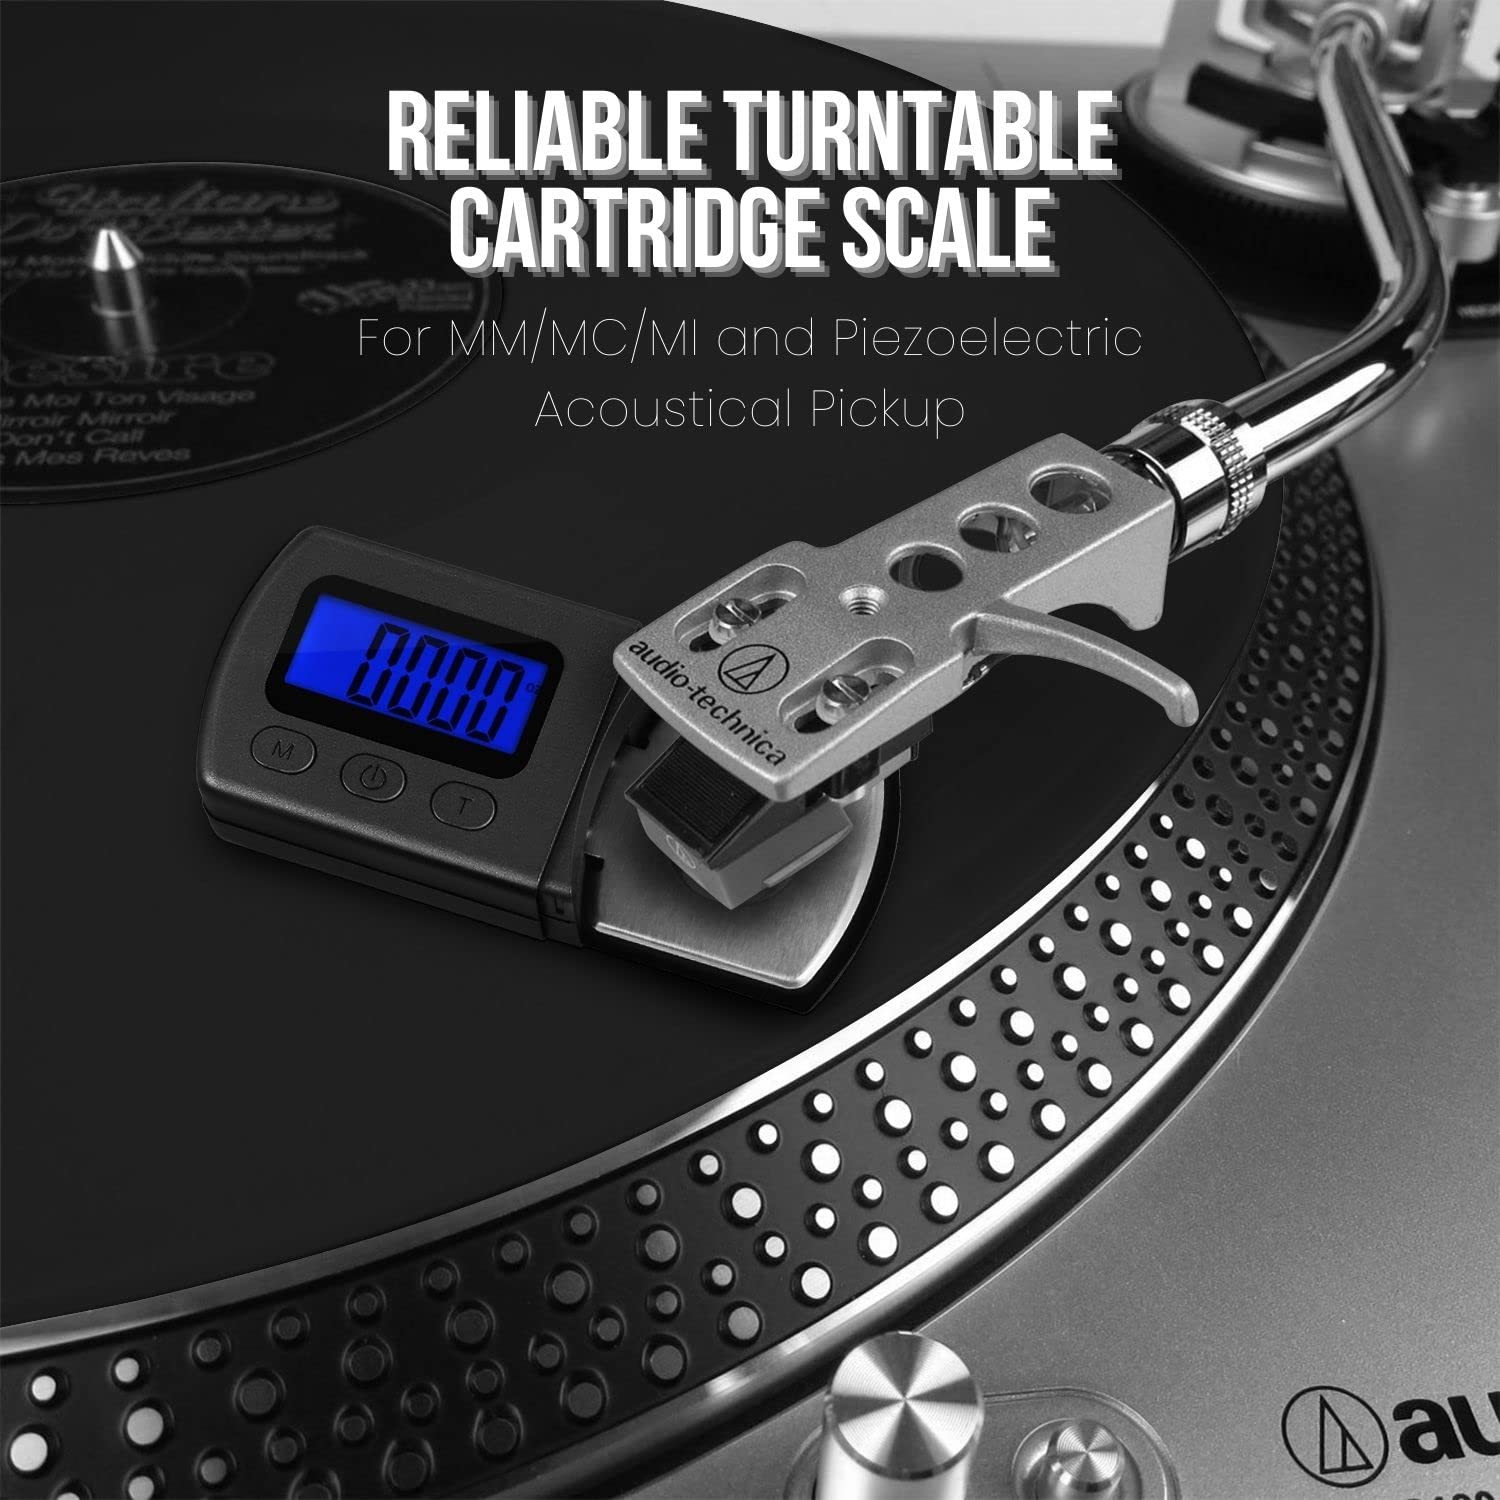 Flexzion Professional Digital Turntable Stylus Scale Load Scale Gauge Record Player Needle Cartridge Scale Vinyl Stylus Turntable Force Scale Gauge with LCD Backlight for Tonearm Phono Cartridge